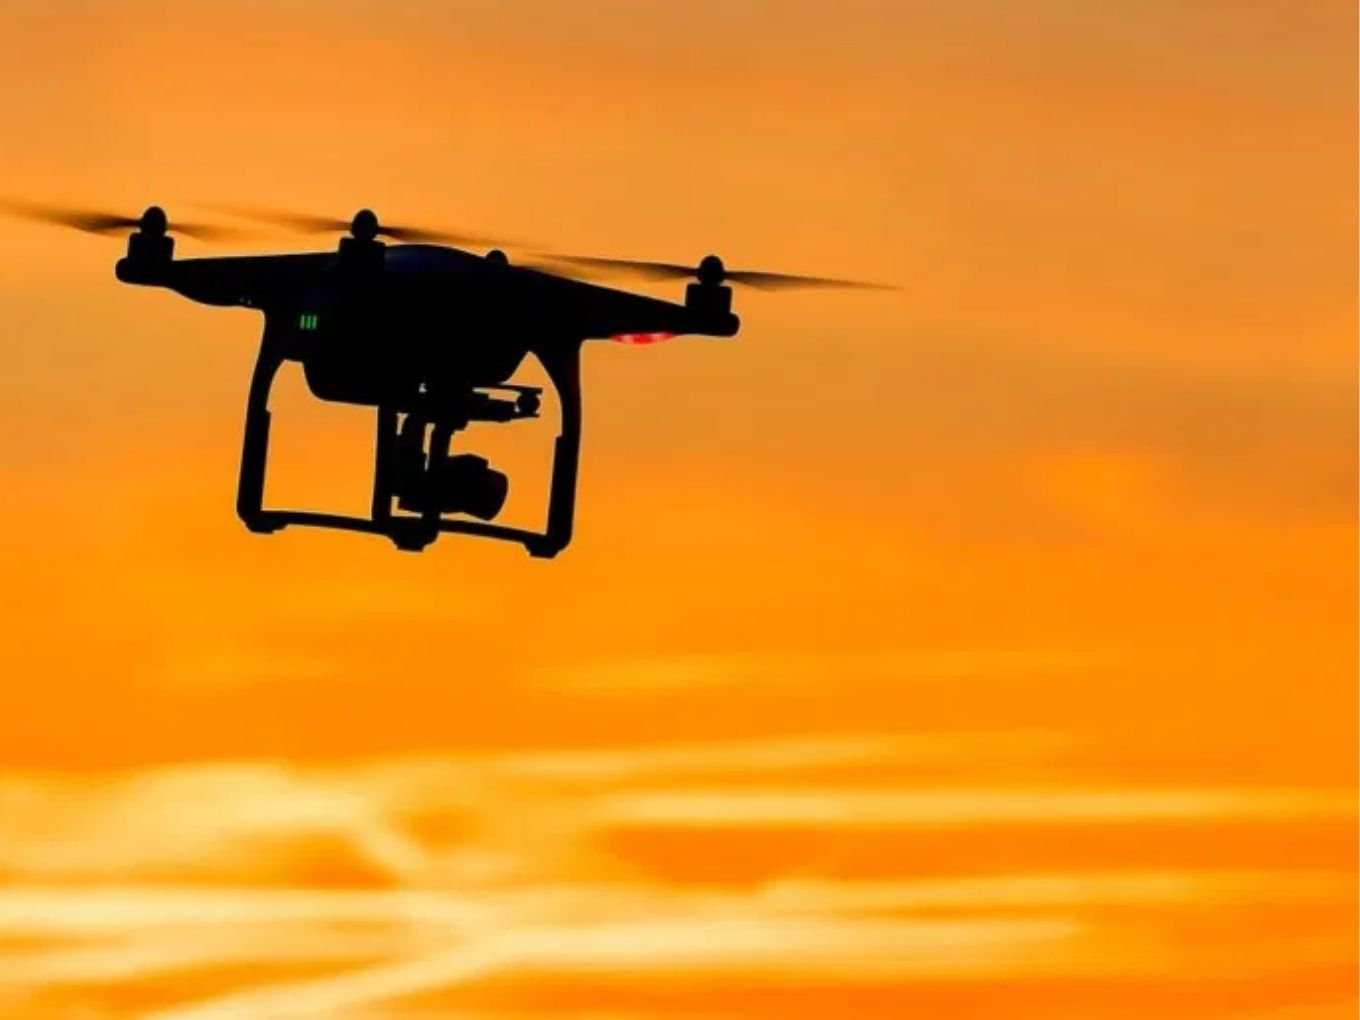 Govt To Take Up Unauthorised Drones Issue With States, UTs